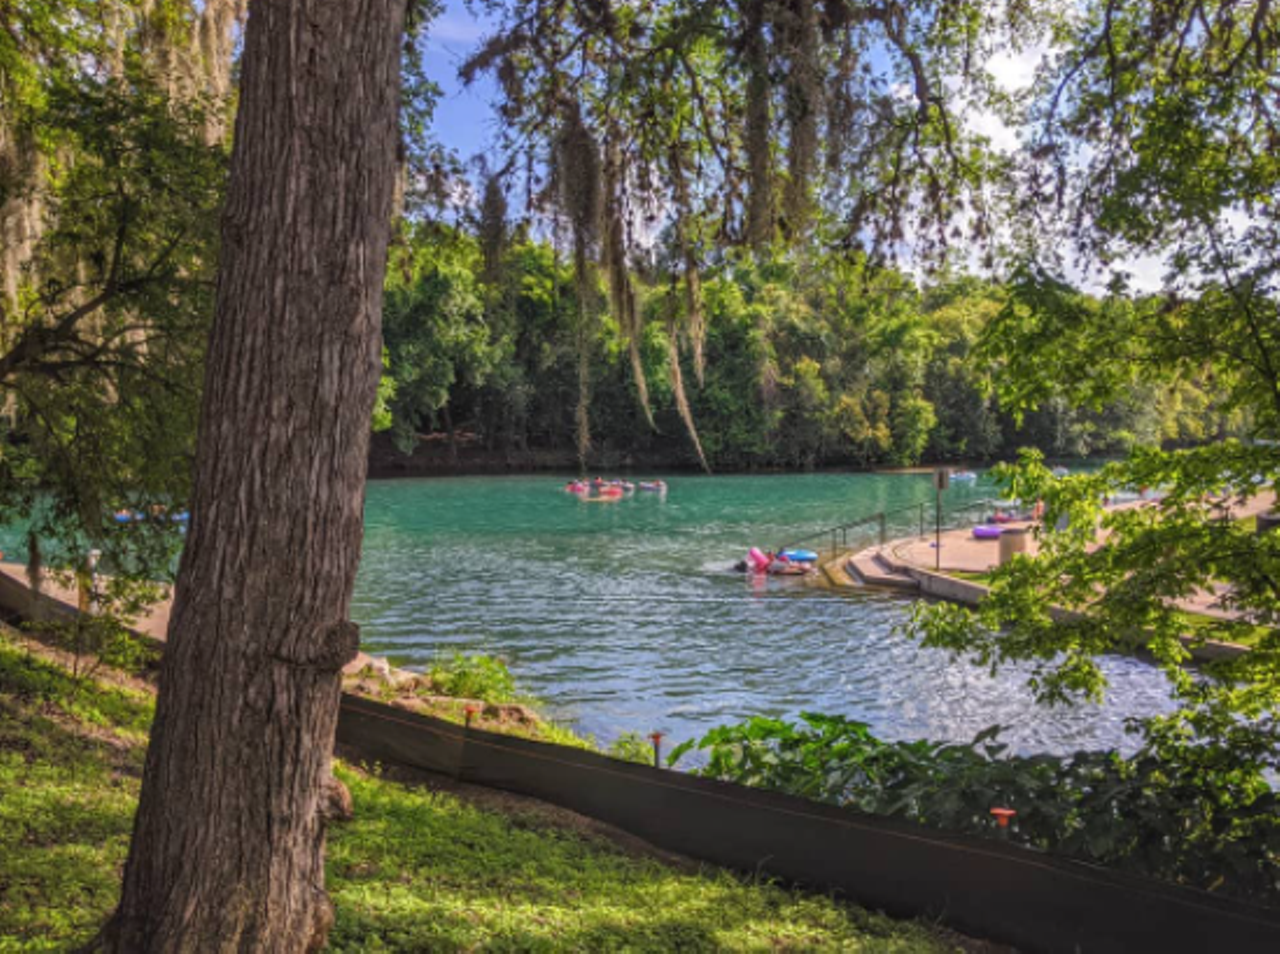 Comal River
Landa Park Drive, New Braunfels, (830) 387-4408, playinnewbraunfels.com
What better way to spend the day than floating down the Comal River with a drink of choice in-hand and some tunes?
Photo via Instagram / awkwardninja87